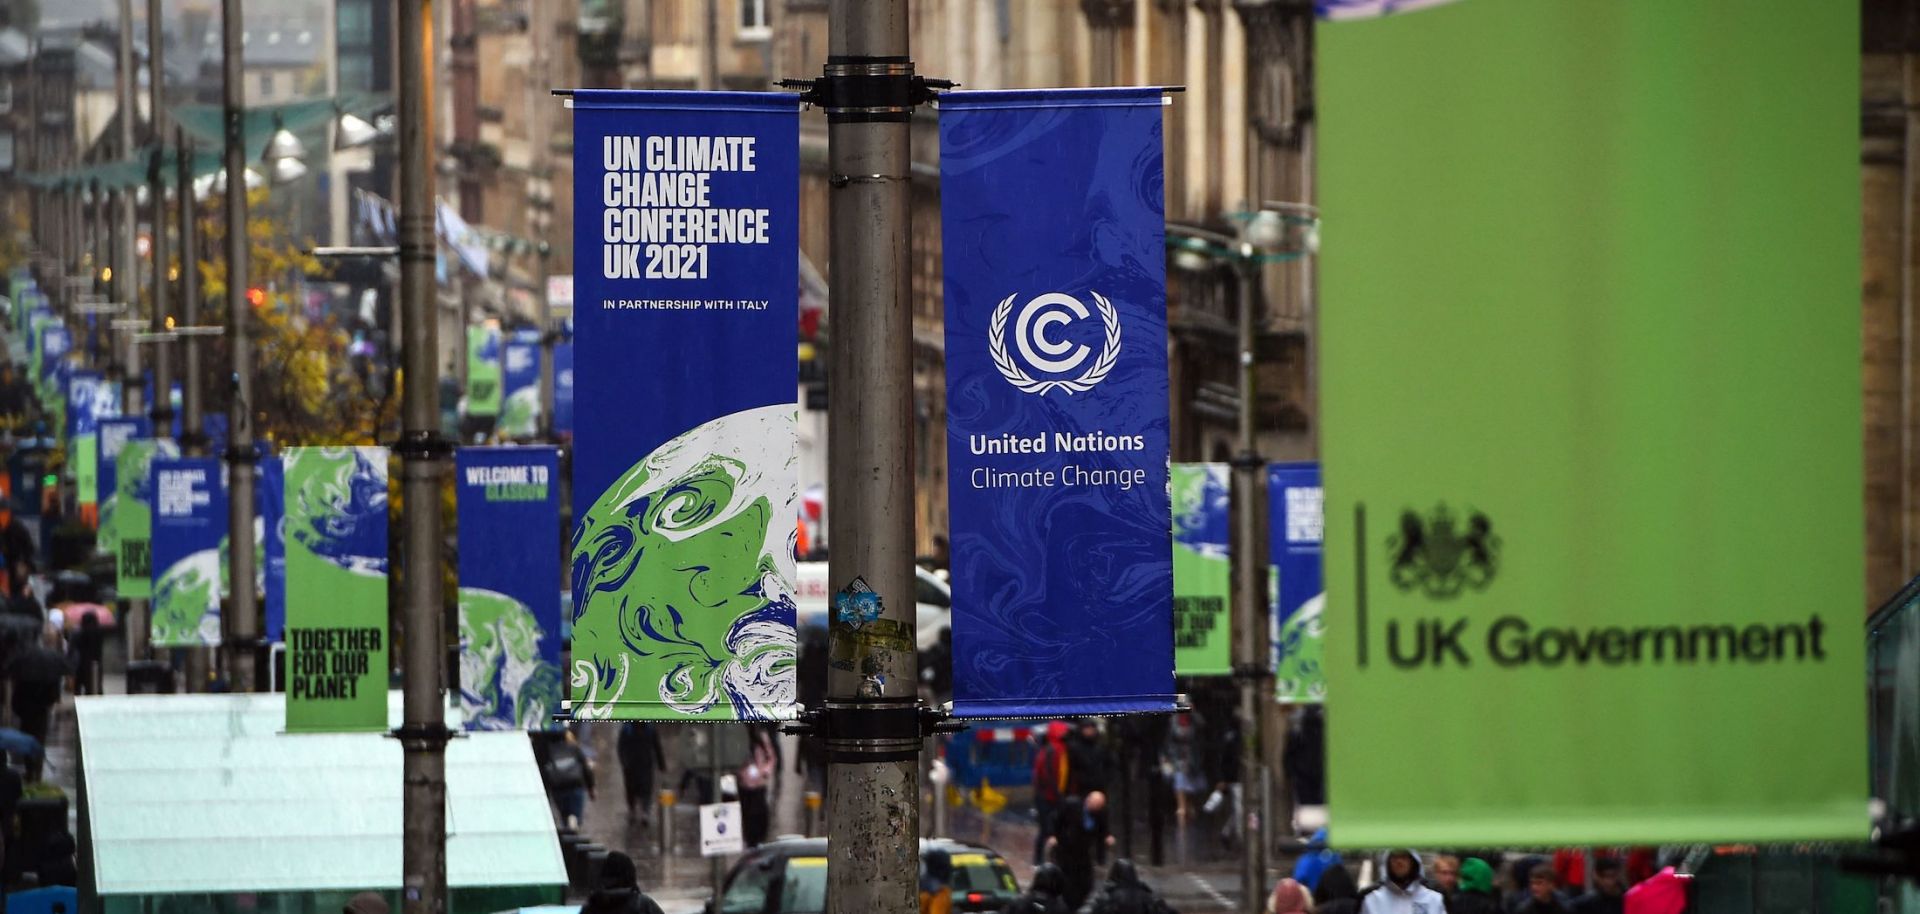 COP26 banners hang from lamp posts Oct. 29, 2021, in Glasgow, Scotland ahead of the start of the climate summit.